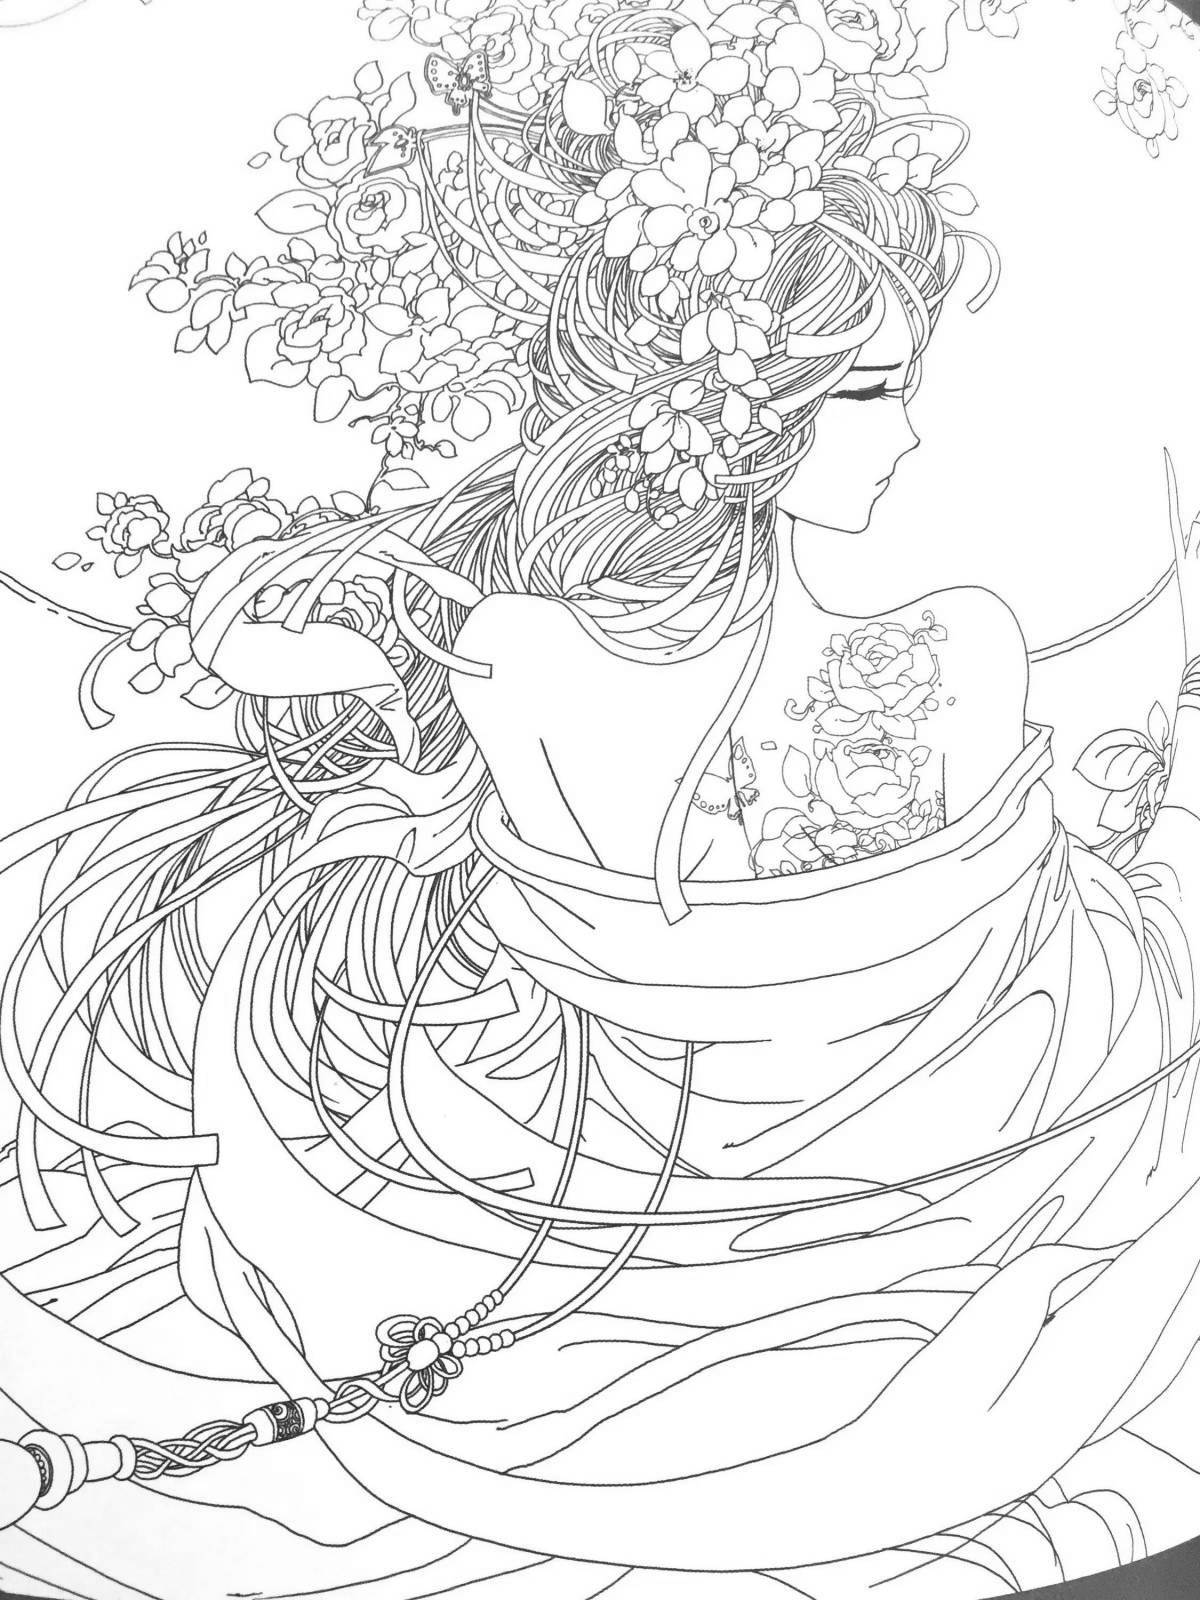 Chinese coloring page